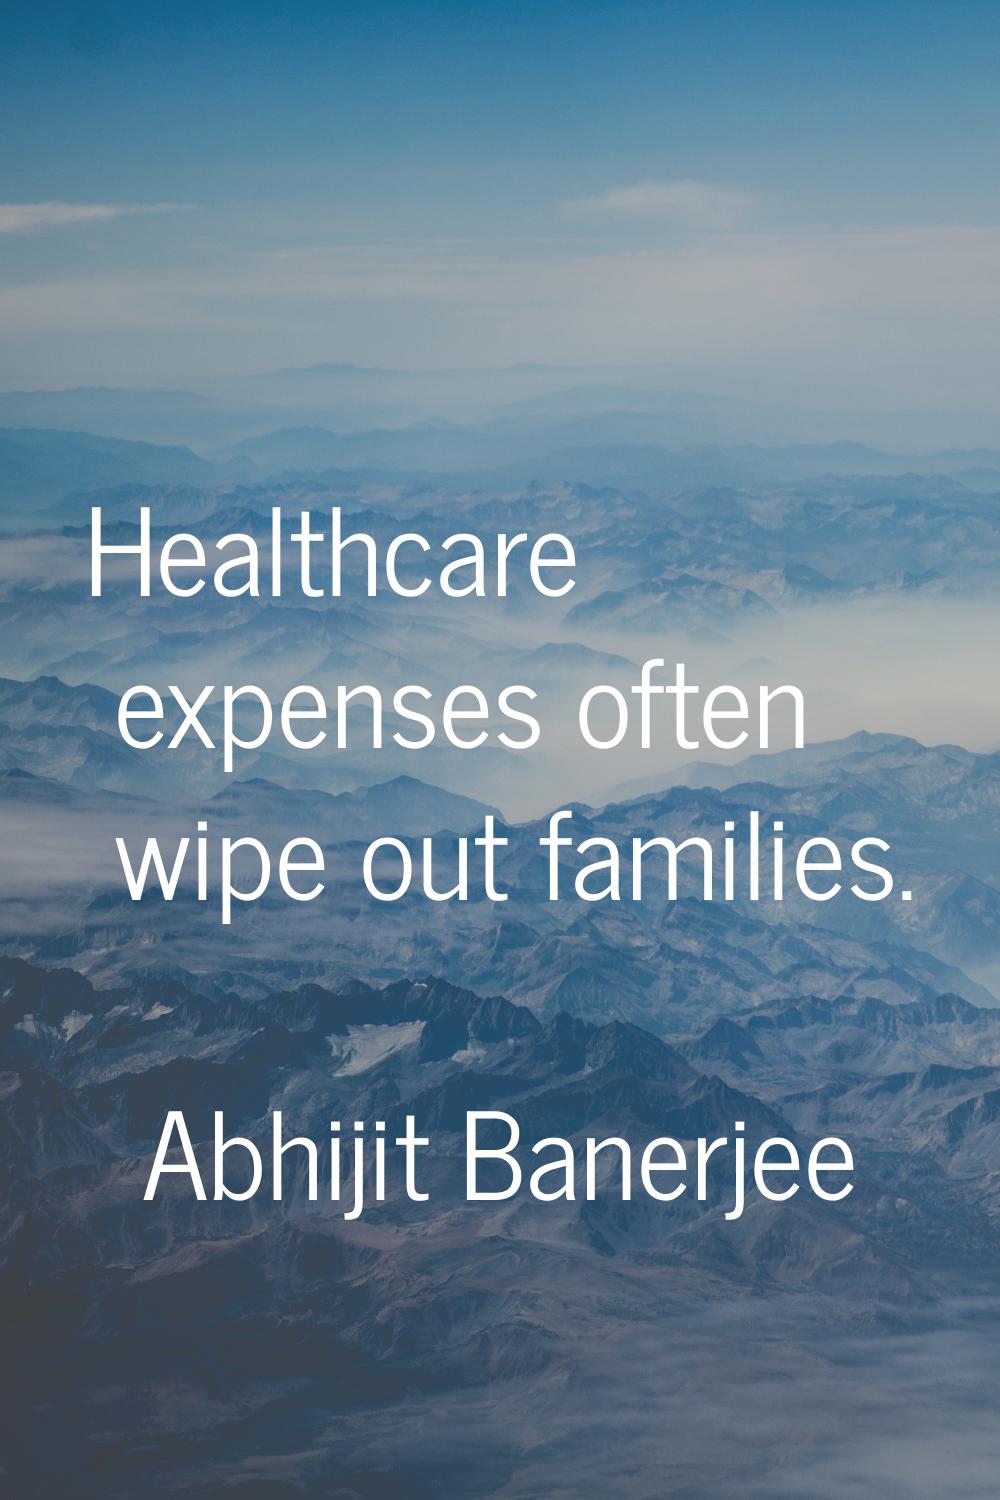 Healthcare expenses often wipe out families.